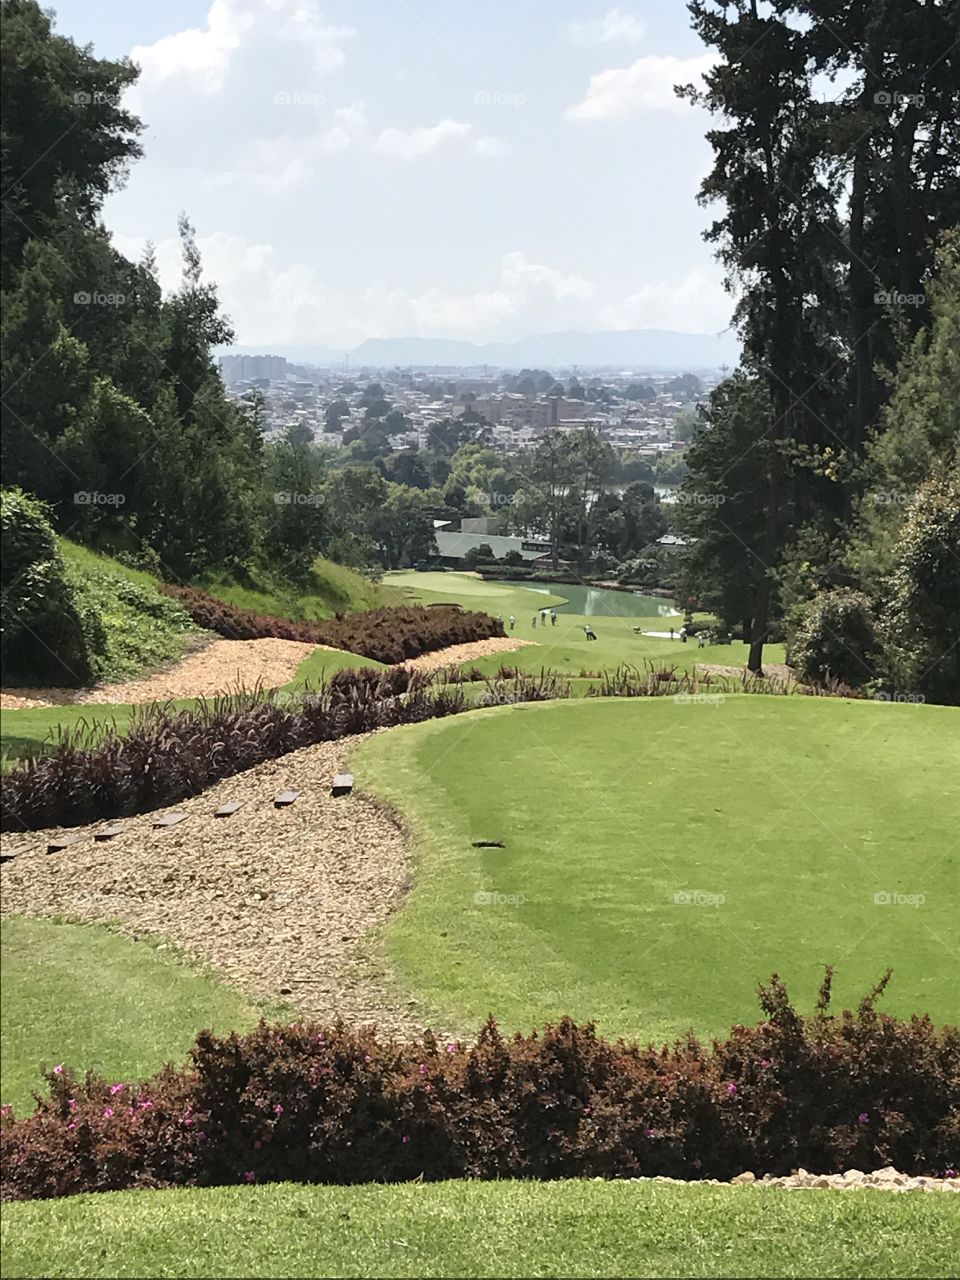 View from 18th tee at Los Lagartos Golf Club in Bogota, Colombia. 